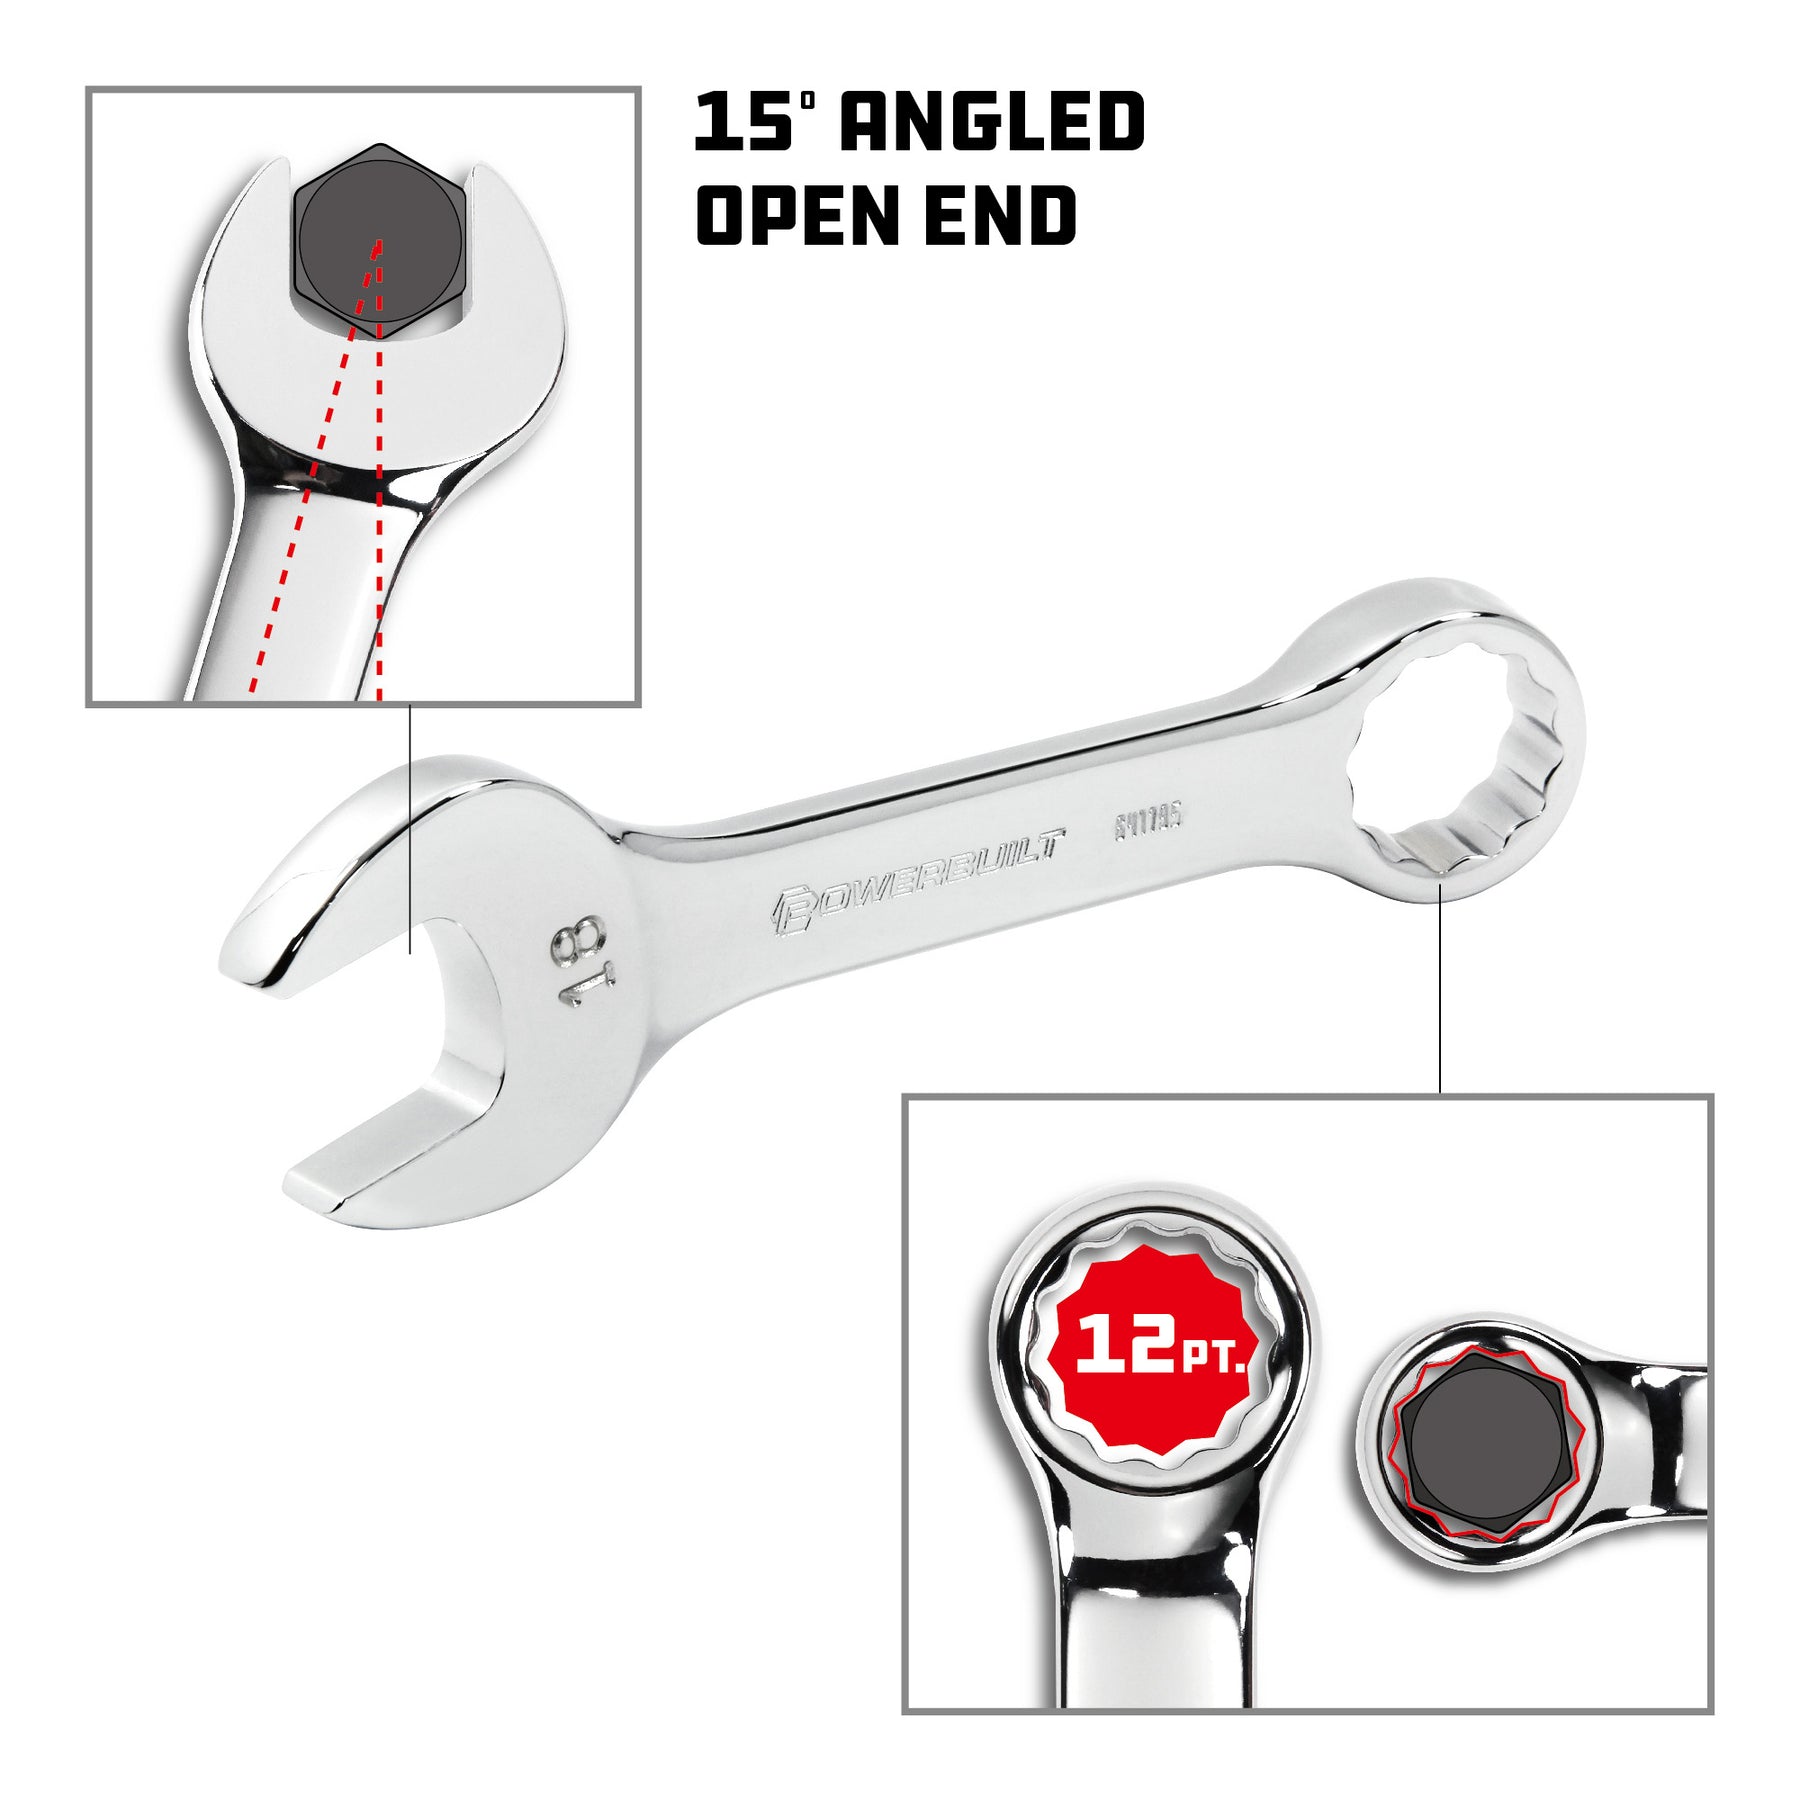 7 Piece Metric Stubby Combination Wrench Set